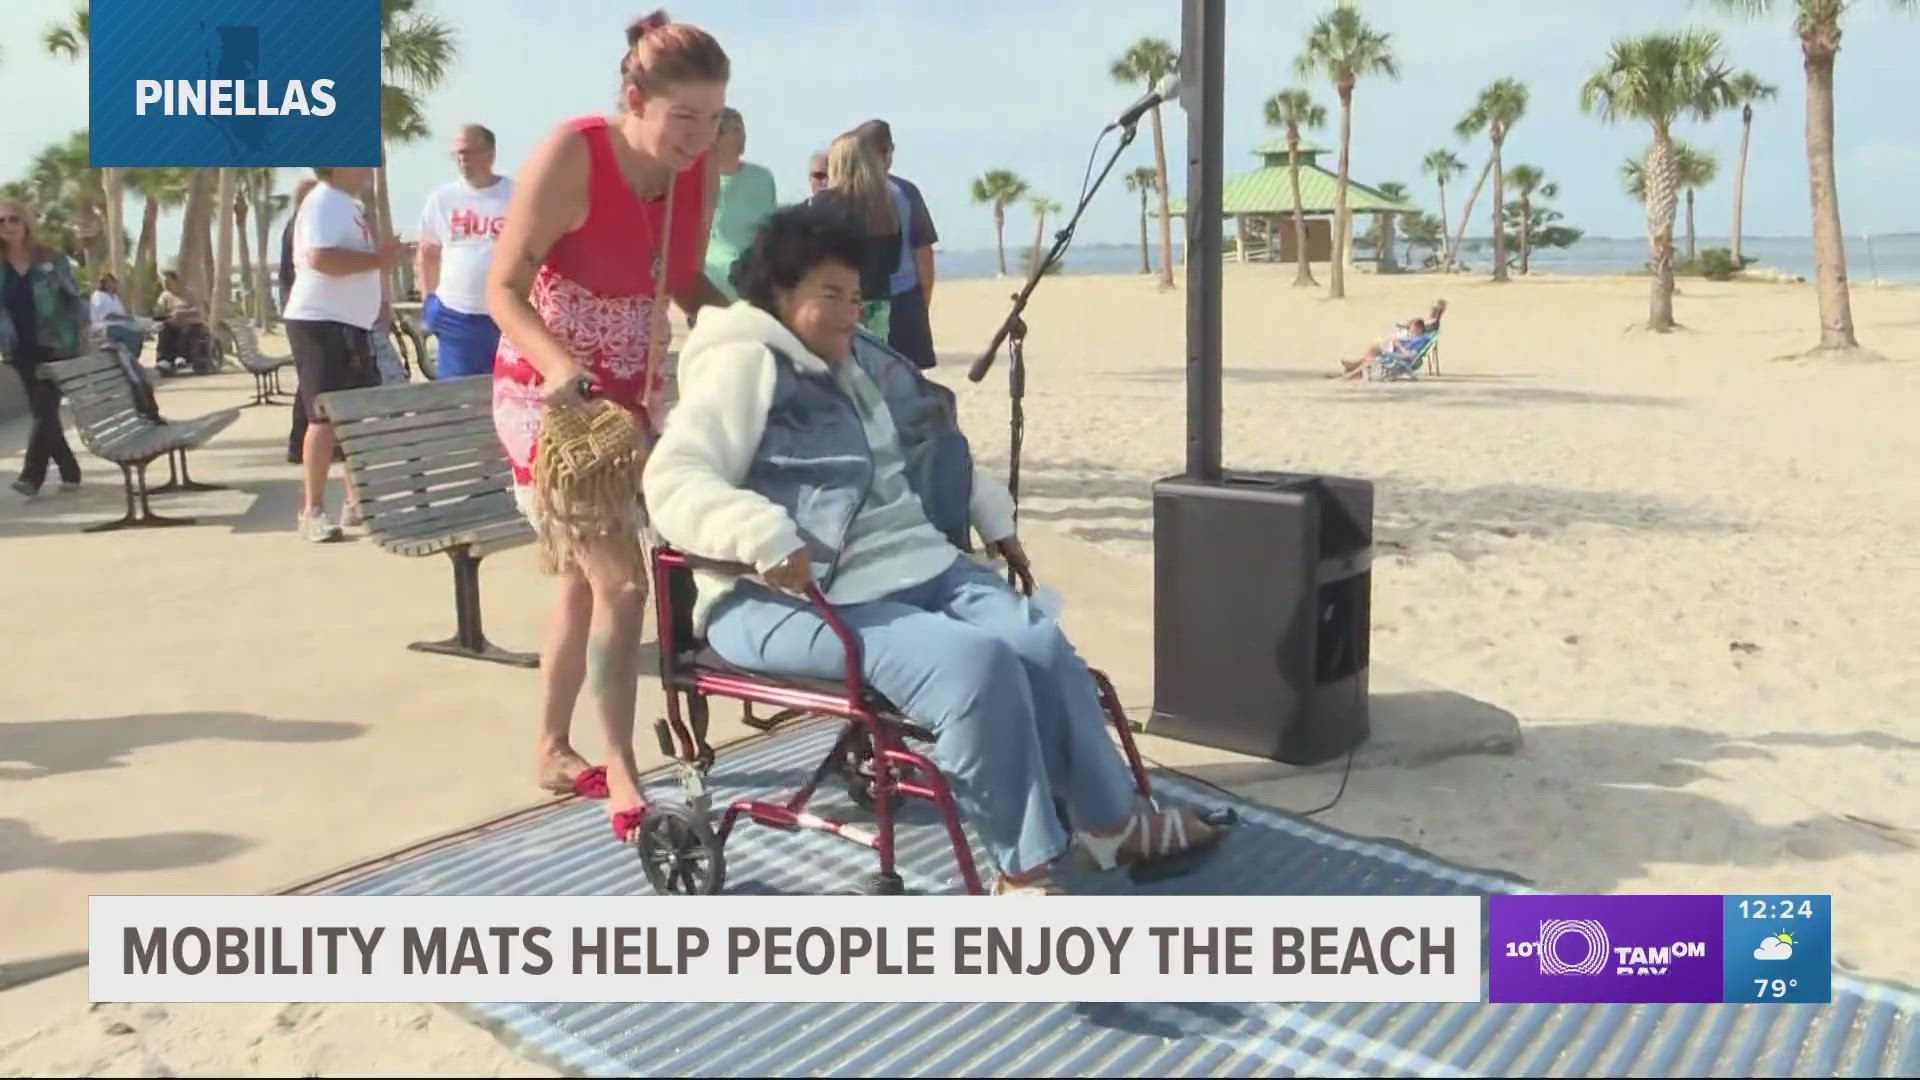 A full list of beaches with mobility mats in the Tampa Bay area can be found at helpusgather.org/accessiblebeaches.